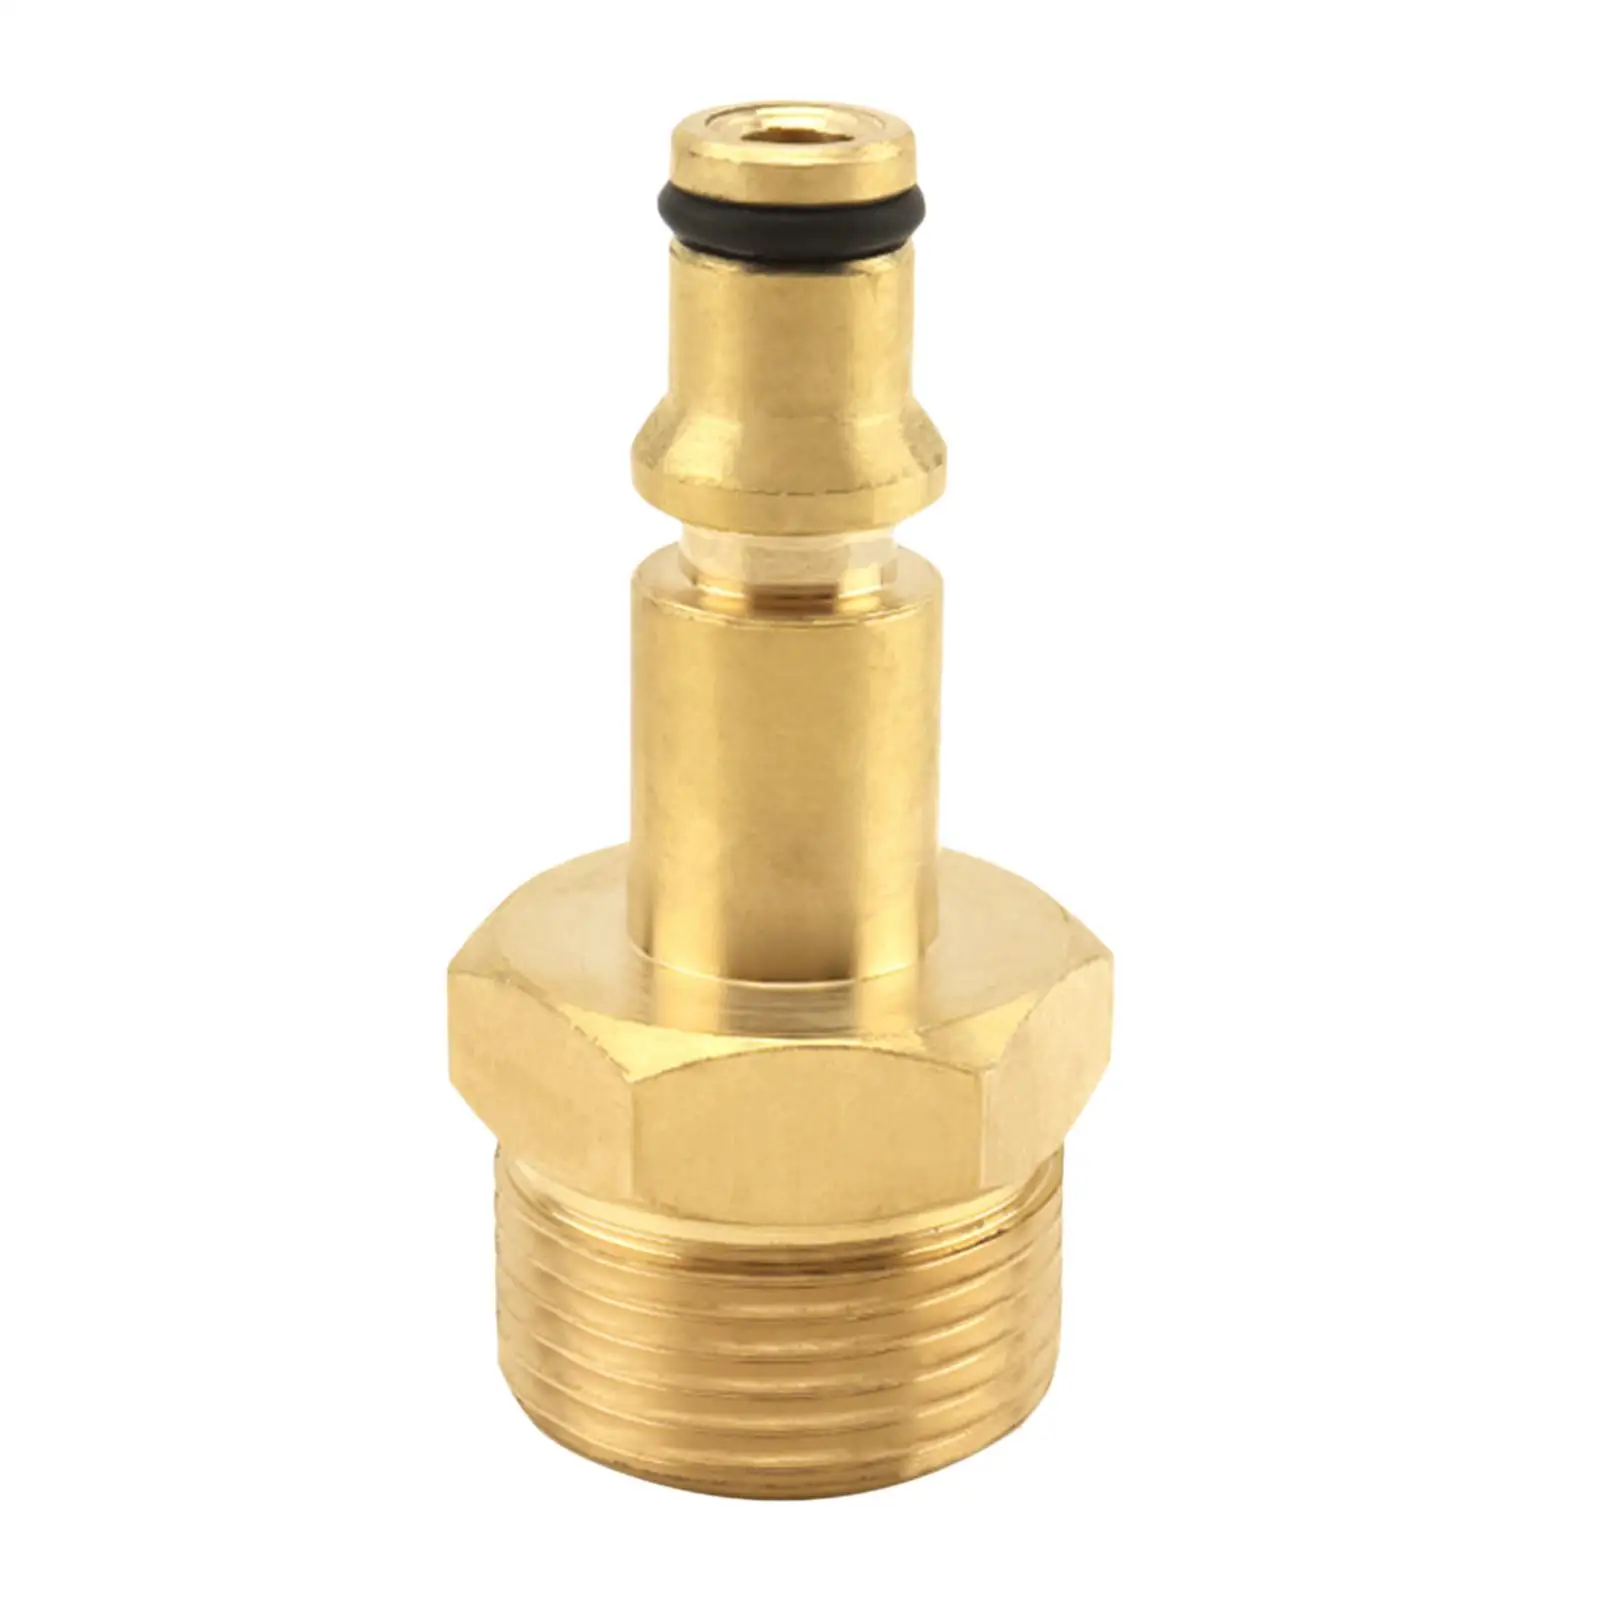 Hose Conversion Joints Pressure Washer Fittings Connectors Brass for  Pressure Washer Garden Supply